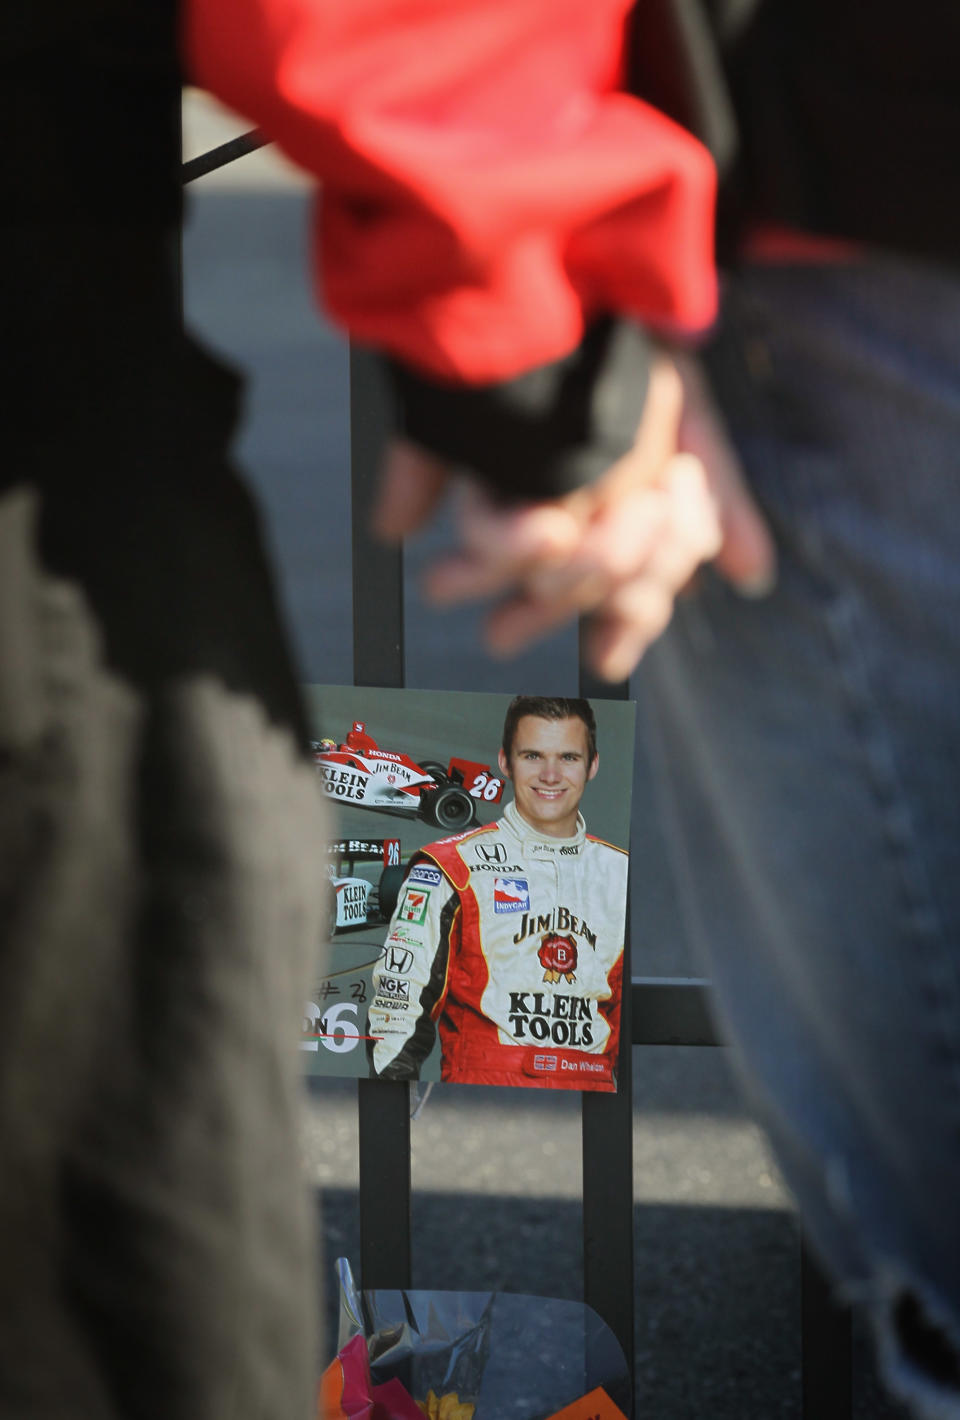 INDIANAPOLIS, IN - OCTOBER 17: Fans look over tributes to two-time Indianapolis 500 winner Dan Wheldon which have been left at a memorial at the gate of the Indianapolis Motor Speedway on October 17, 2011 in Indianapolis, Indiana. Wheldon, winner of the 2011 Indy 500, was killed in a crash yesterday at the Izod IndyCar series season finale at Las Vegas Motor Speedway. (Photo by Scott Olson/Getty Images)